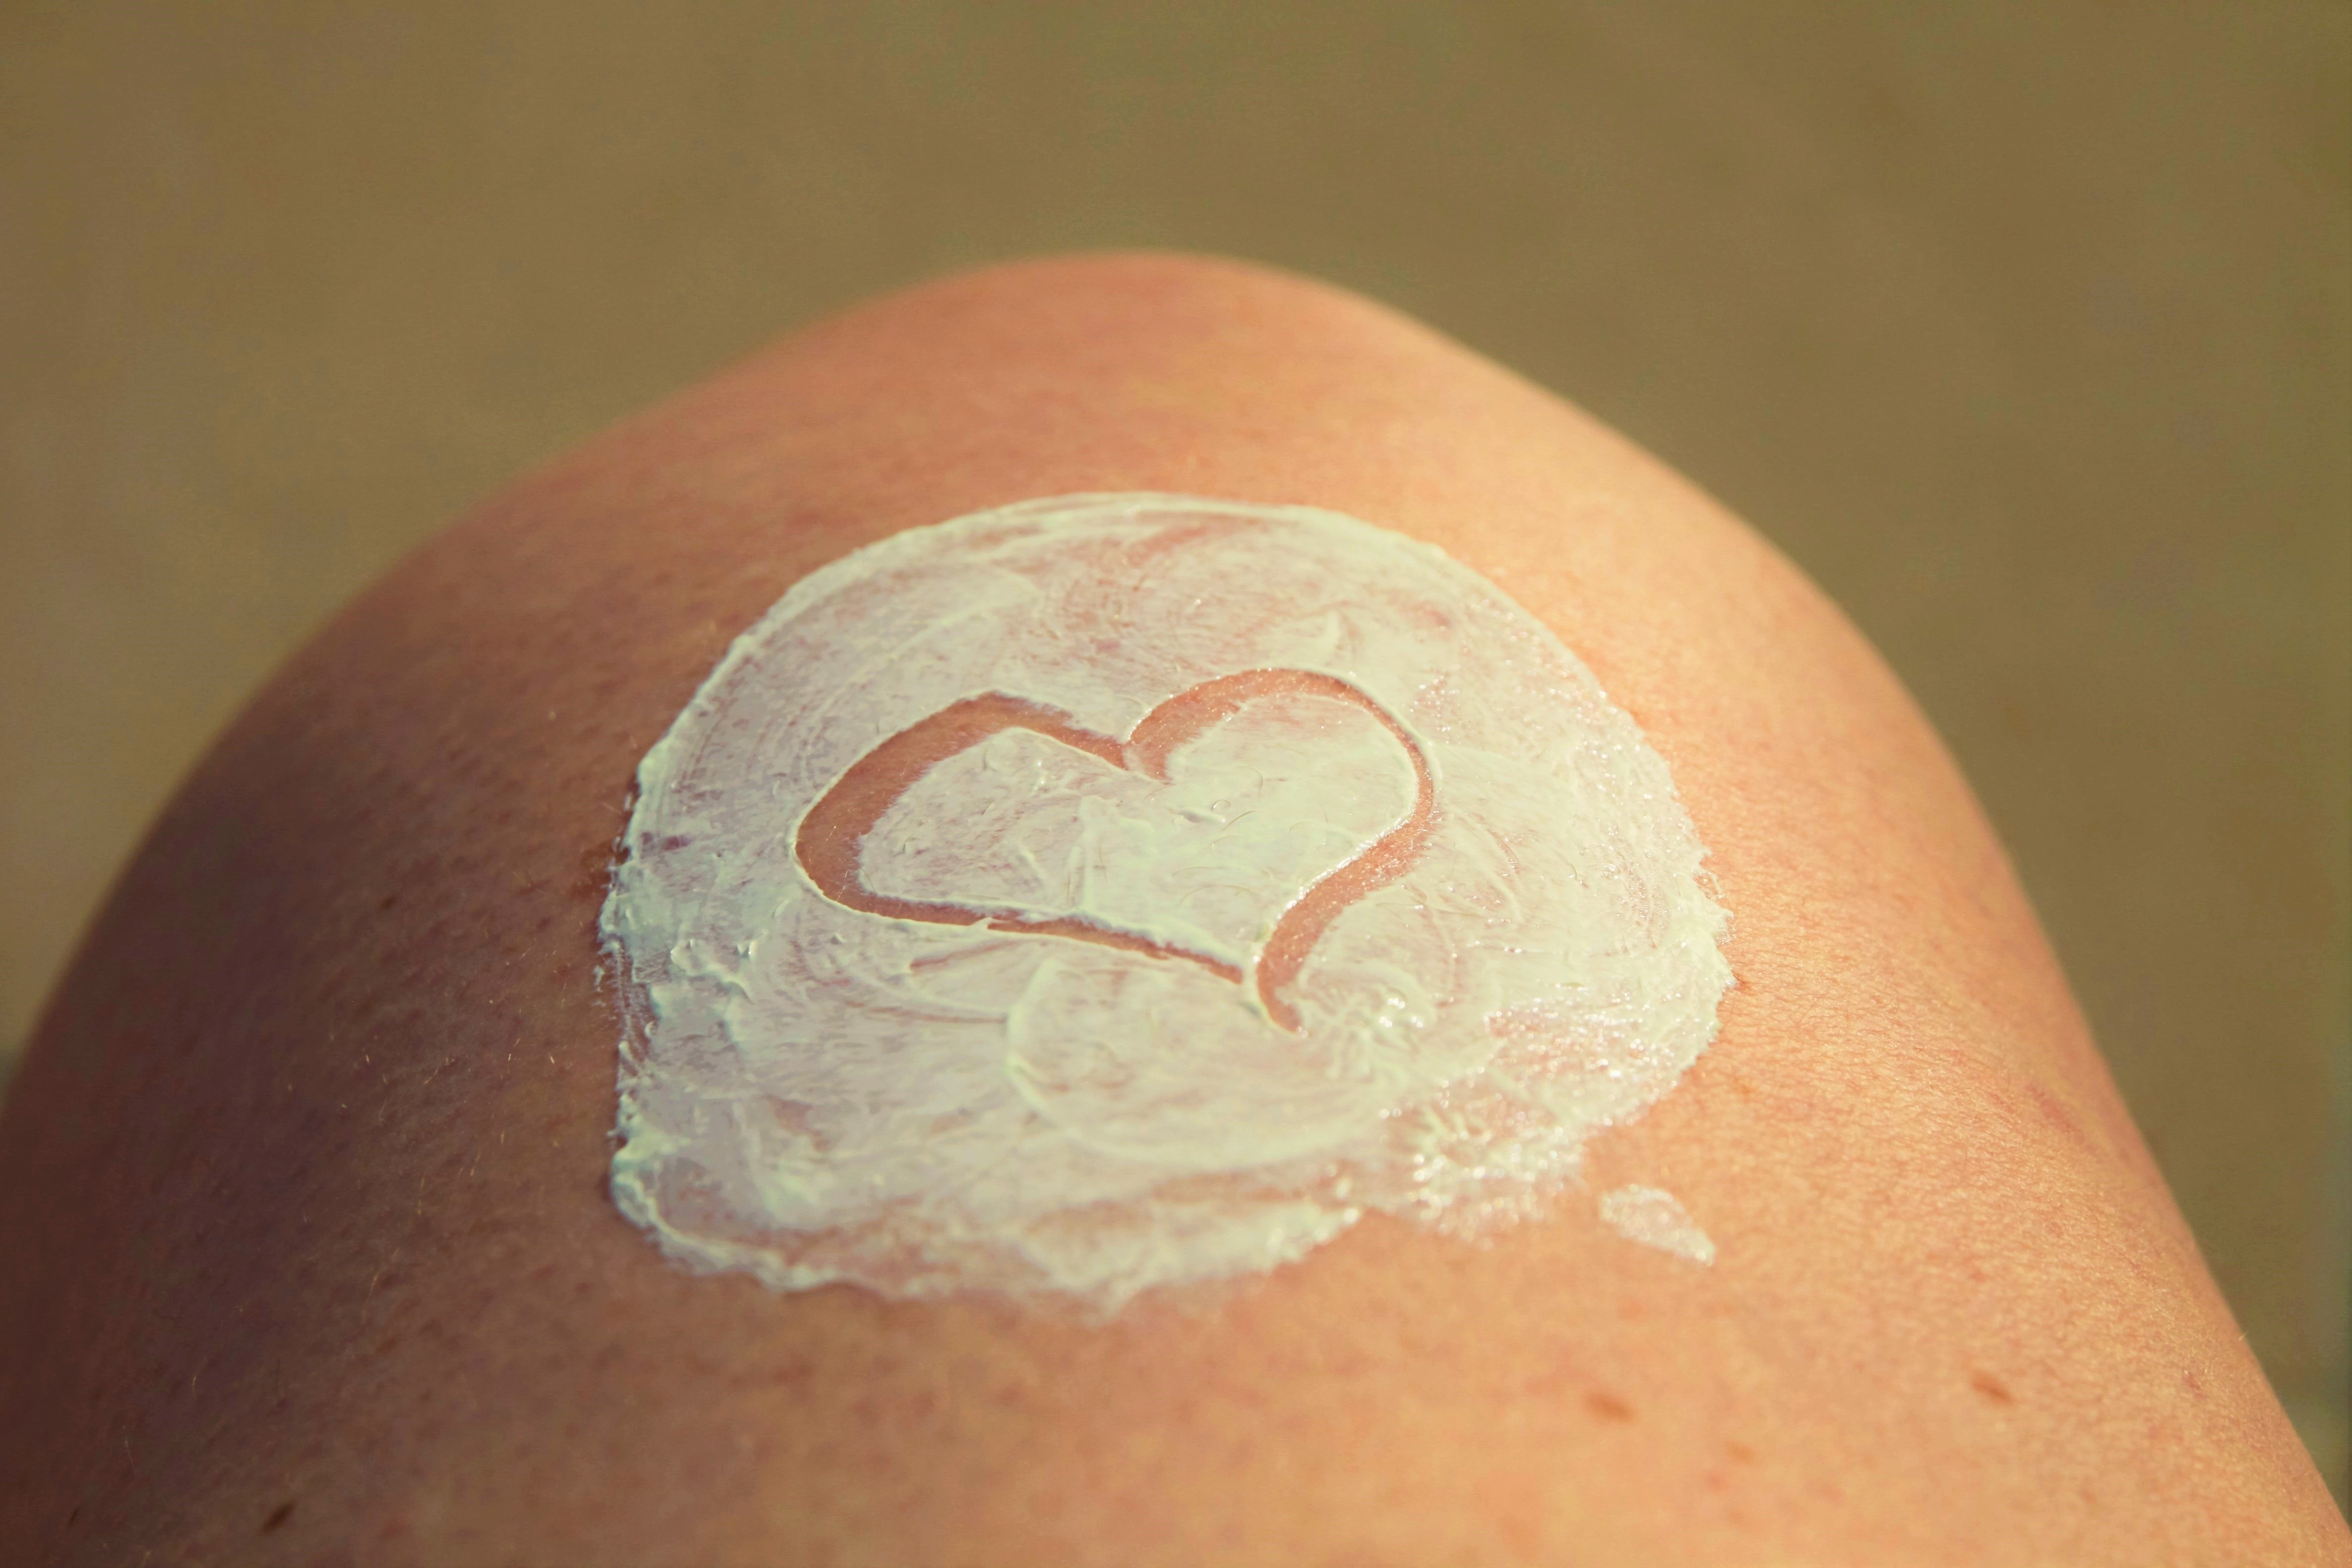 A heart drawn into cream applied on a thigh